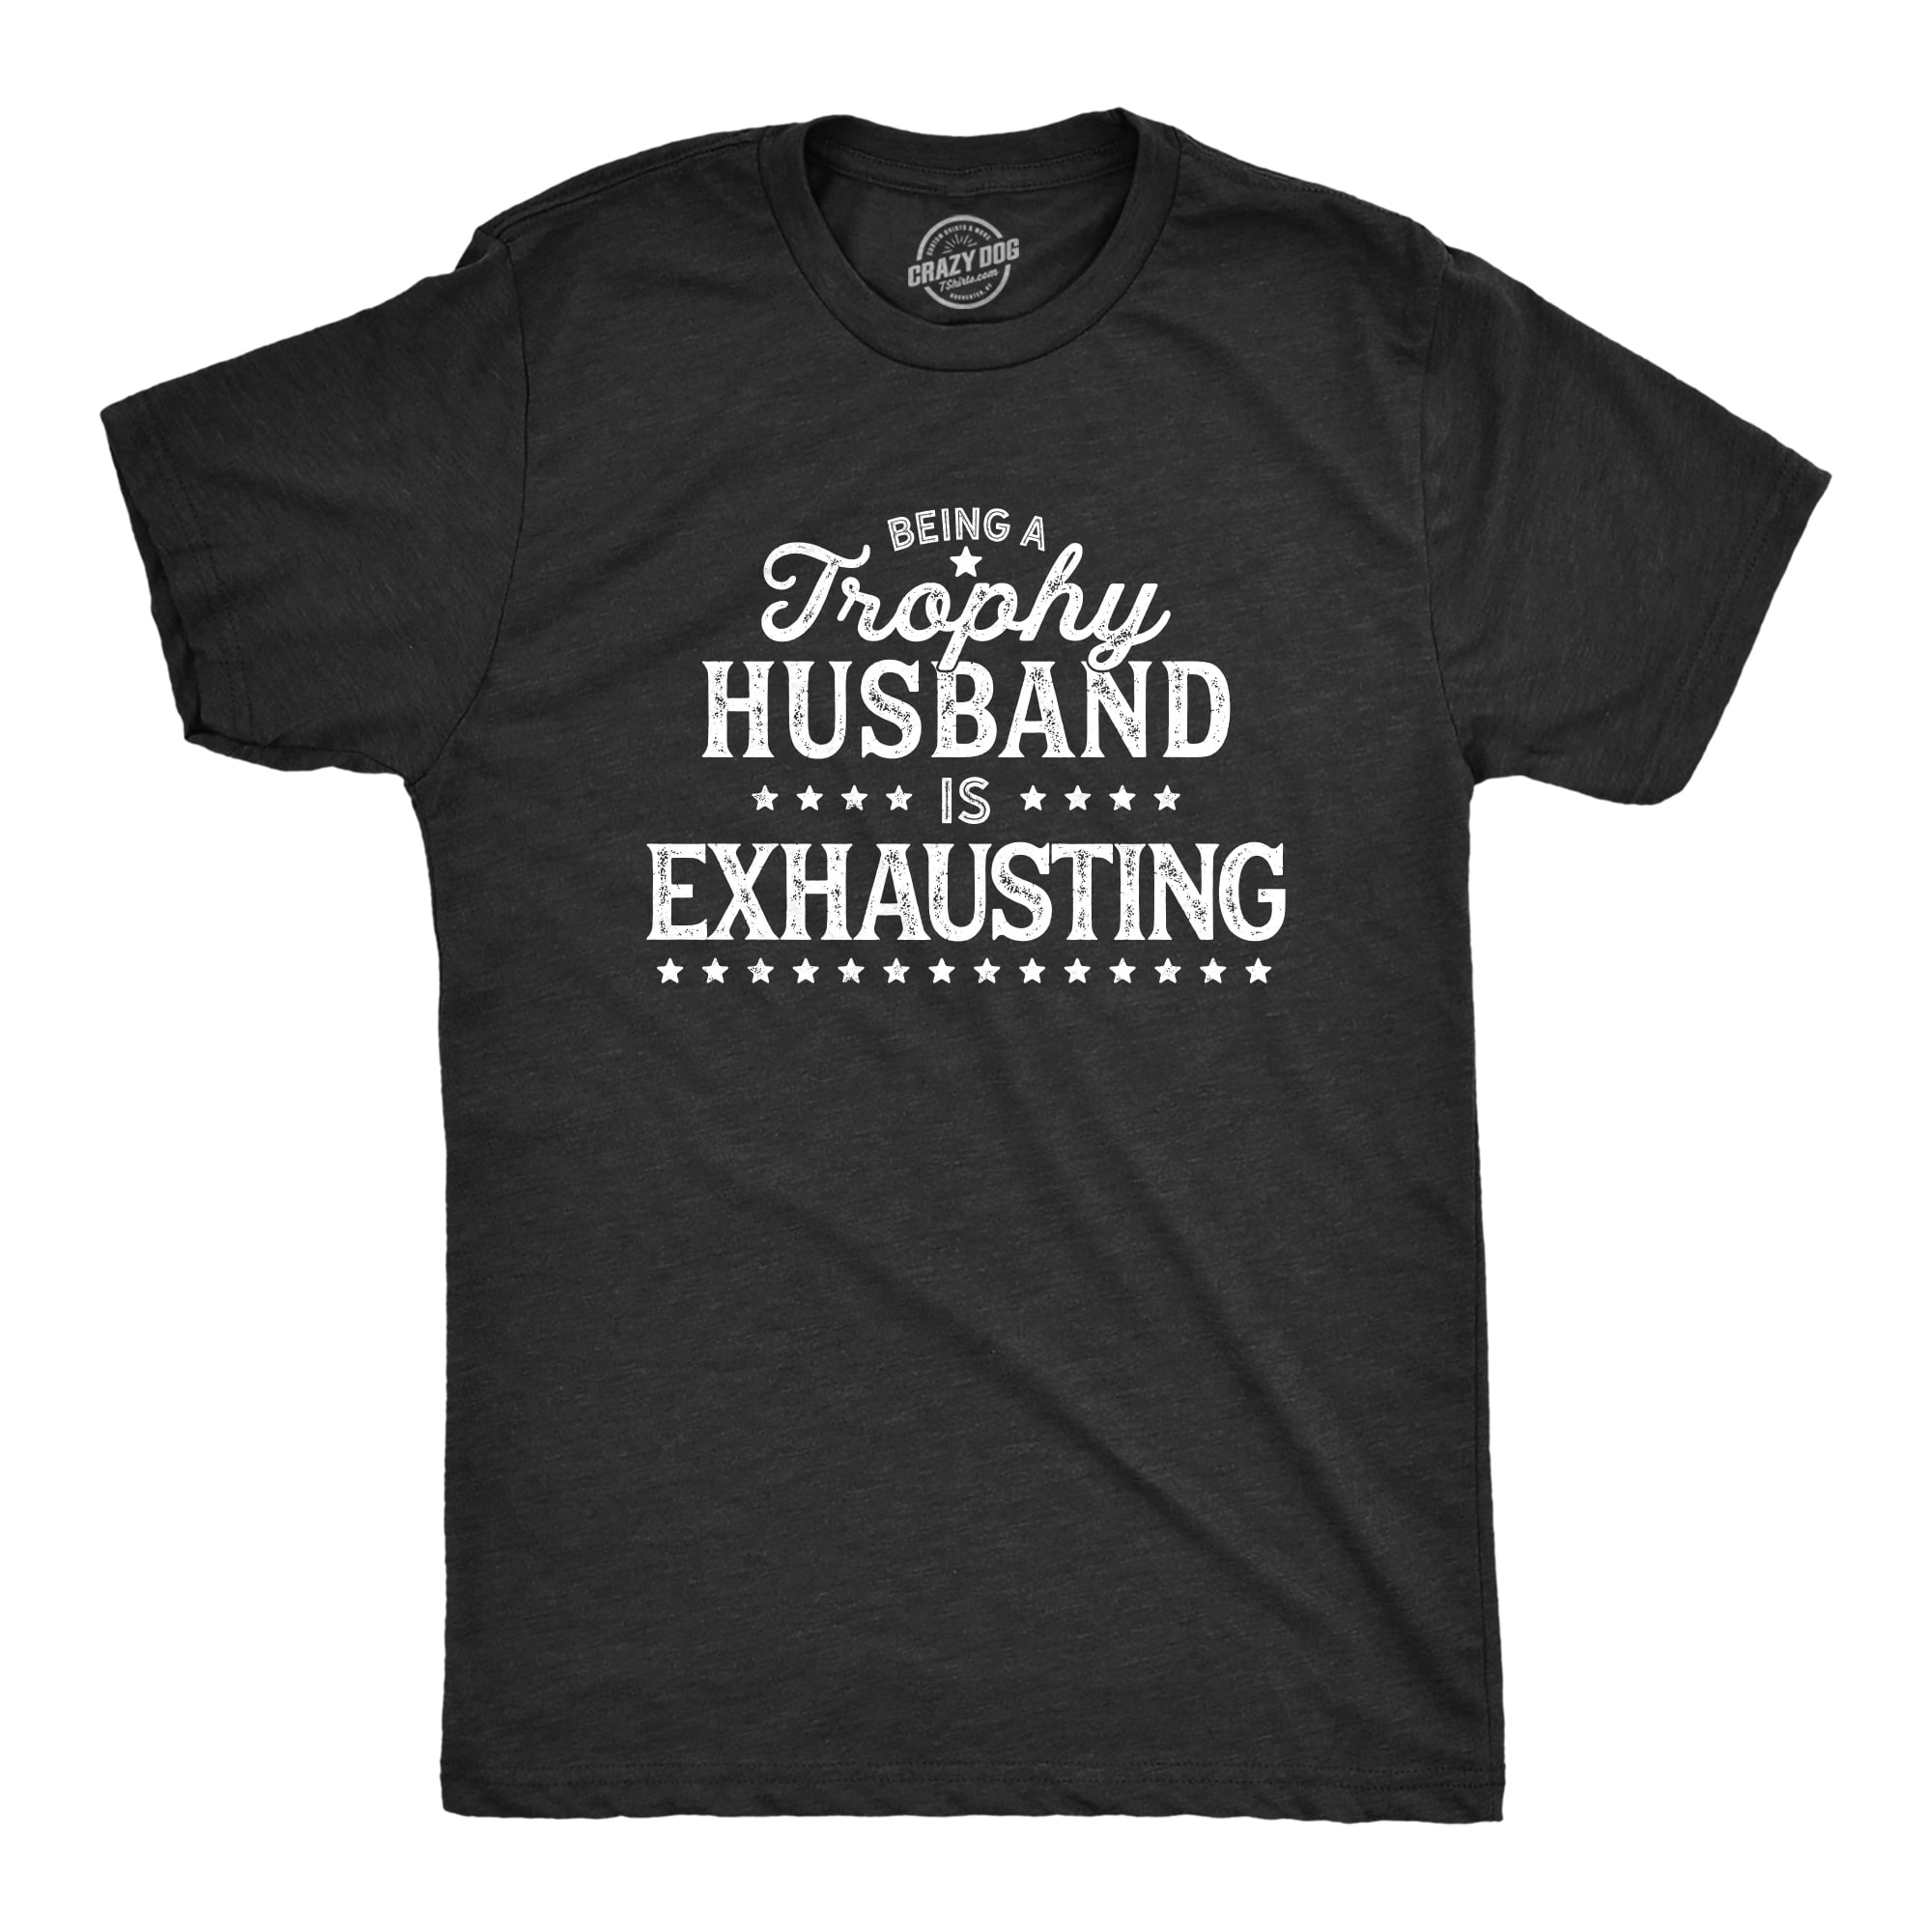 Crazy Dog T-Shirts - Mens Being A Trophy Husband Is ...